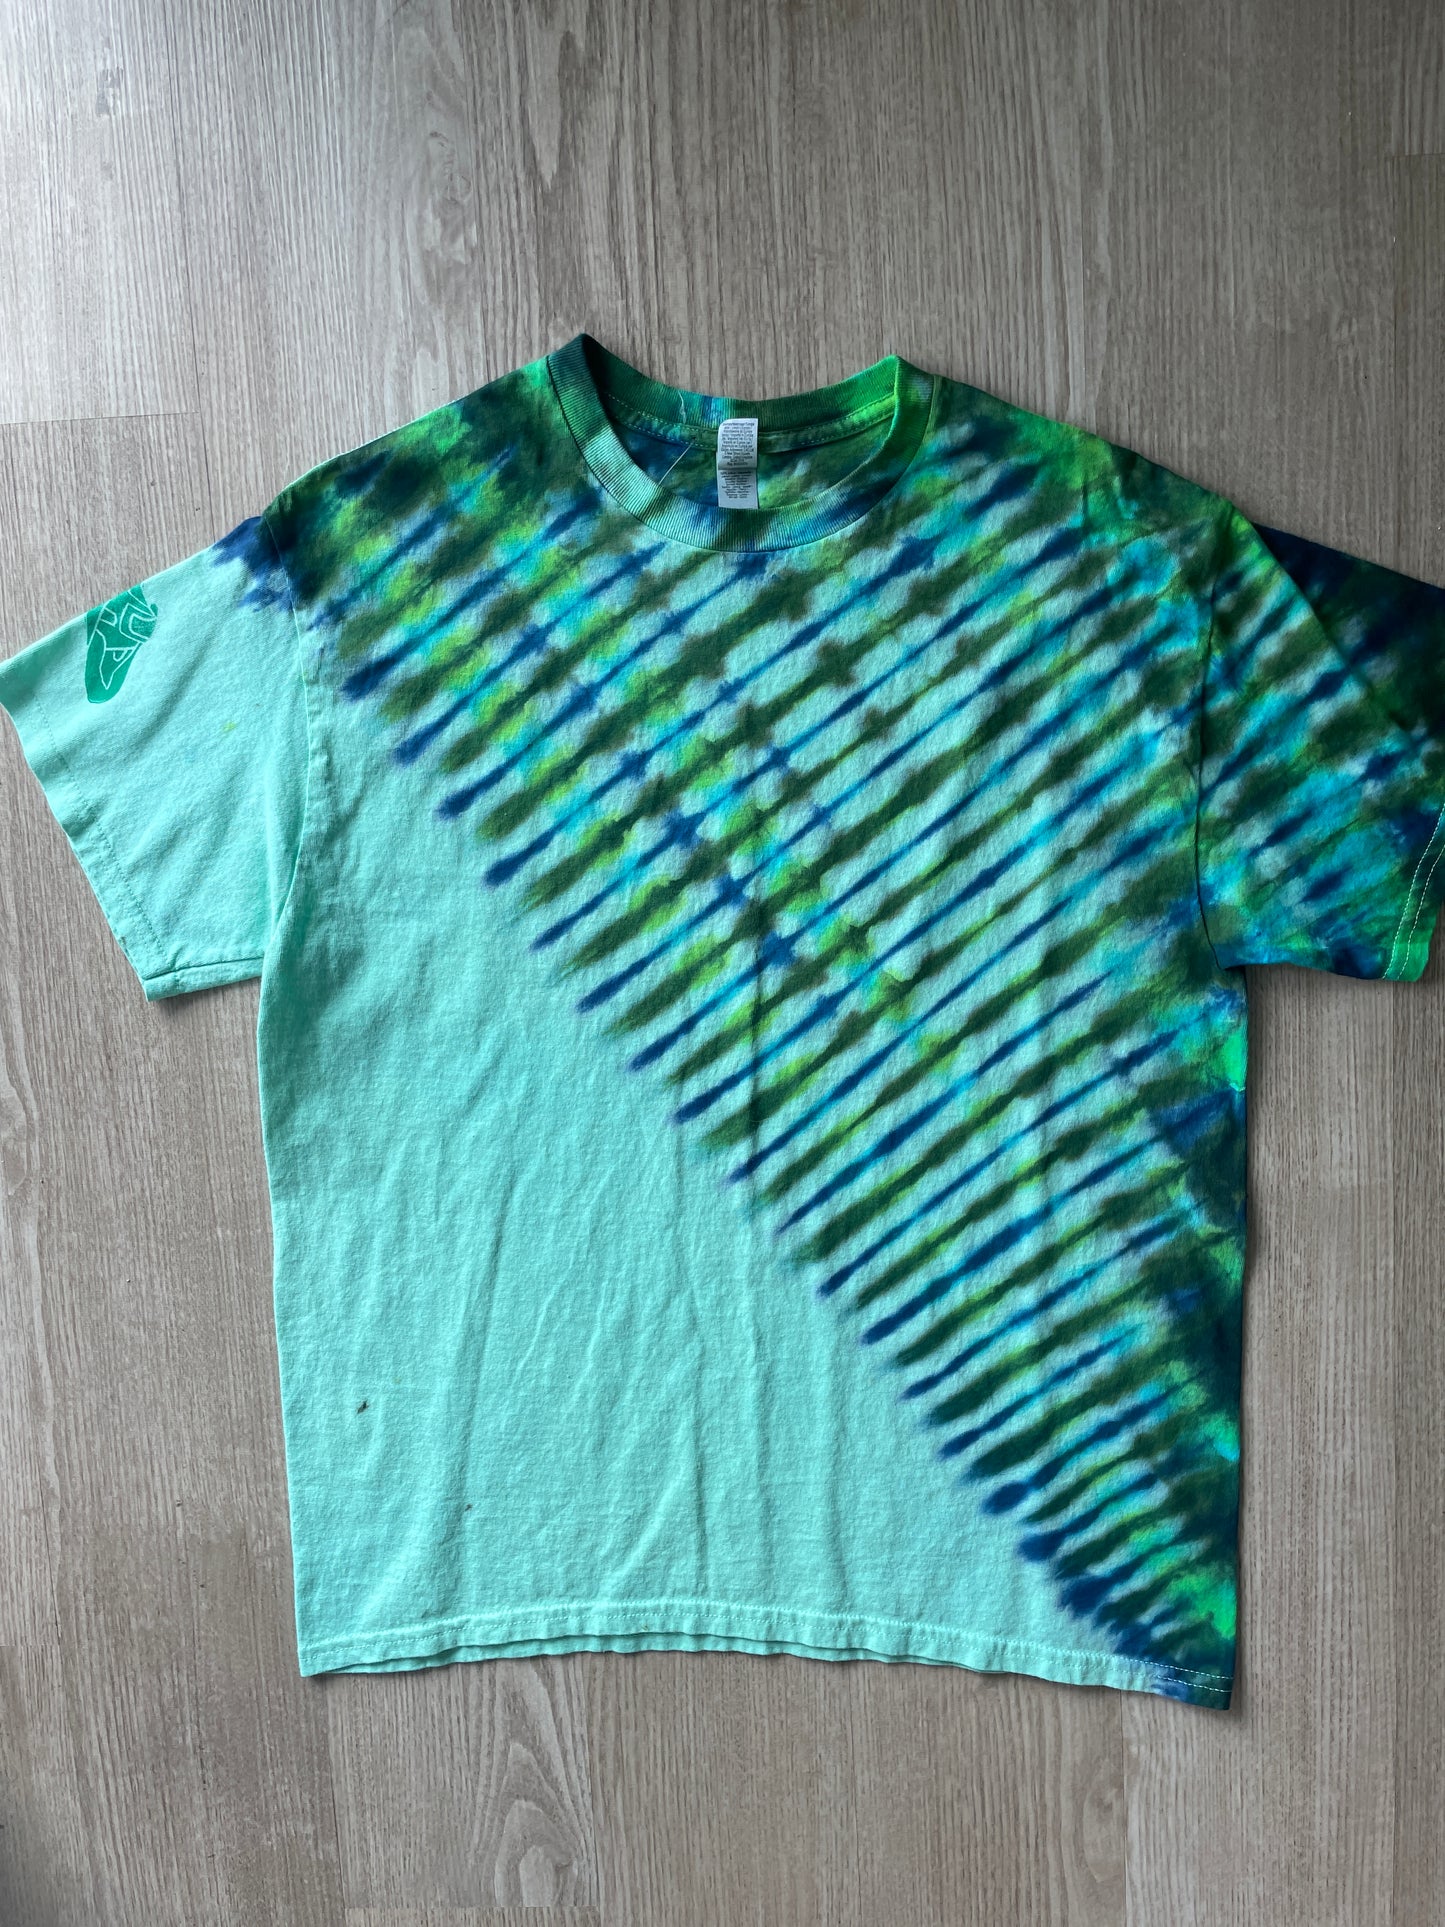 LARGE Men’s Climbing Shoe Handmade Tie Dyed T-Shirt | One-Of-a-Kind Green and Blue Pleated Short Sleeve